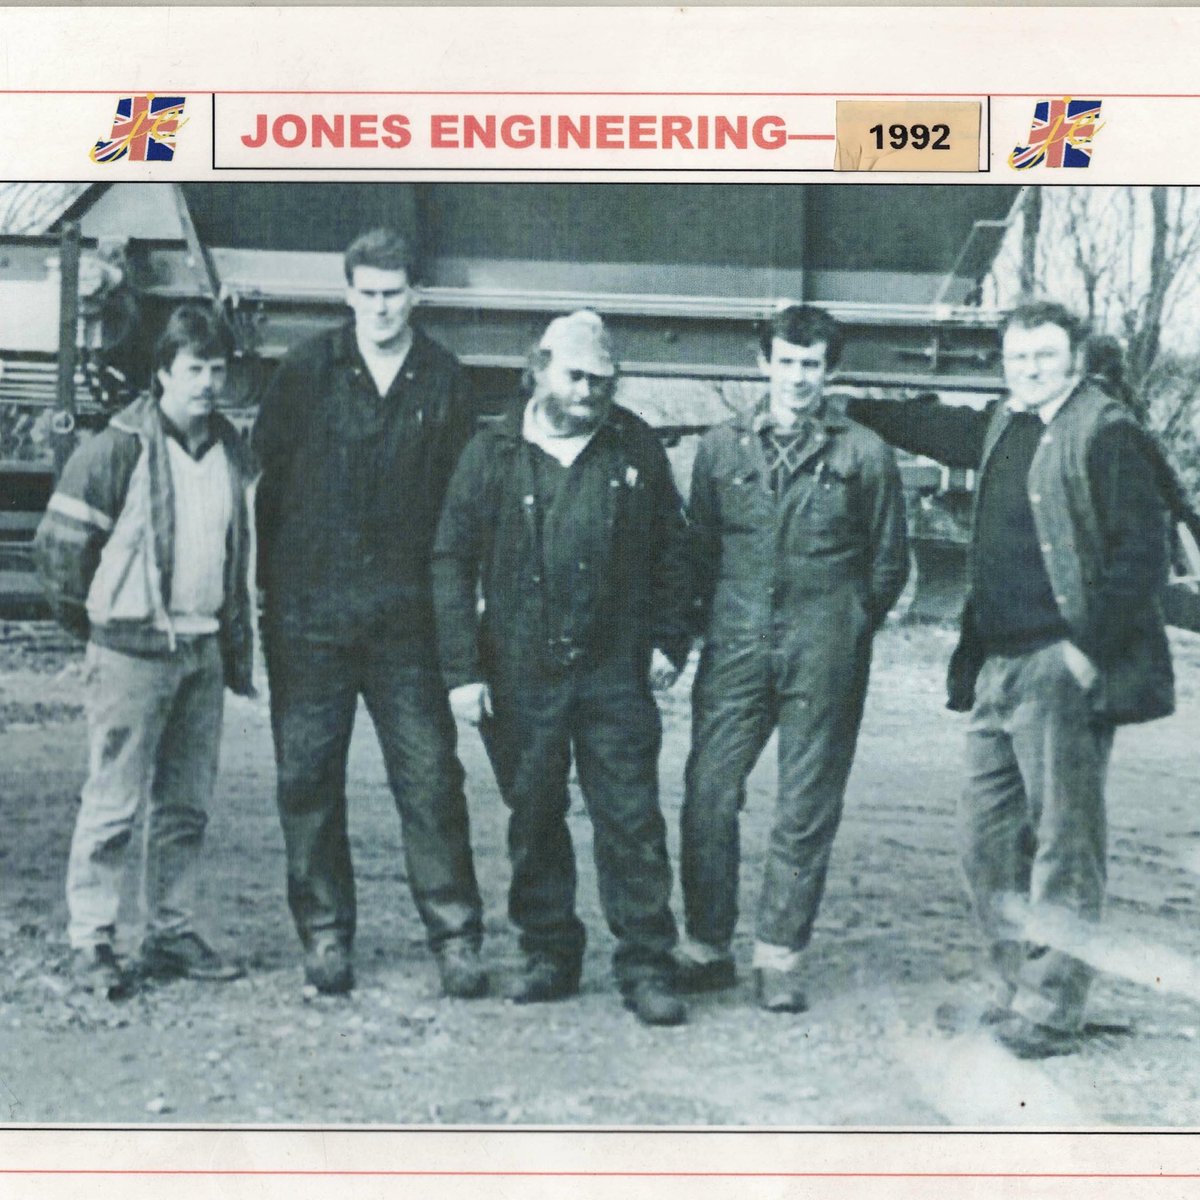 Throw back Thursday to 1992, the early days of Jones. Only one person has retired from this photo, the other 4 still work/part of Jones Engineering today. Can you guess who they? #tbt #tb #britishmanufacturing